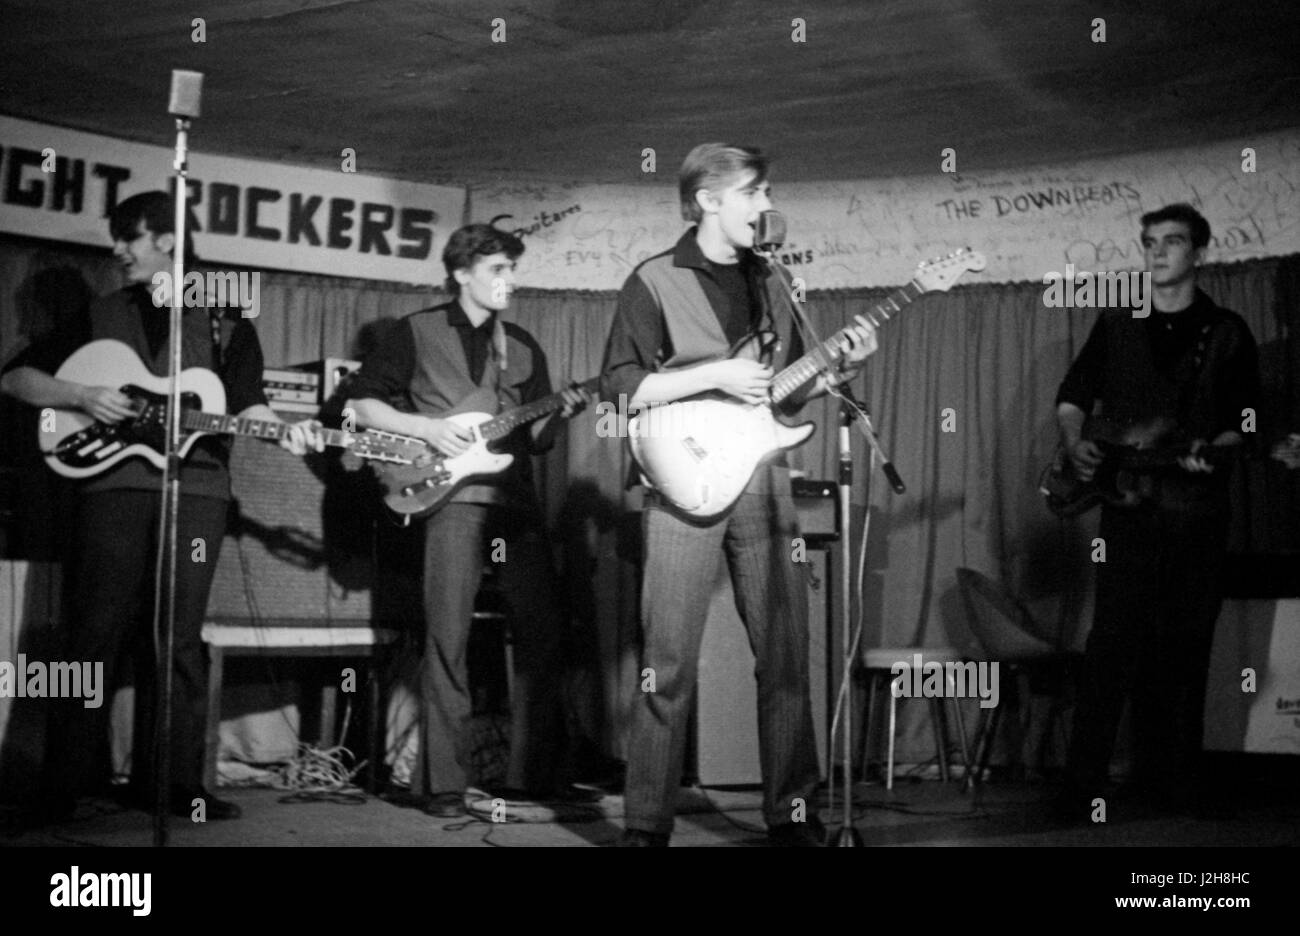 Belgian rock band Les Night Rockers performing at the Golf-Drouot in Paris in 1964.  With: Armand Massaux, Robert Hesbois, Freddy Maillard and Gérard Boone. Photo André Crudo Stock Photo